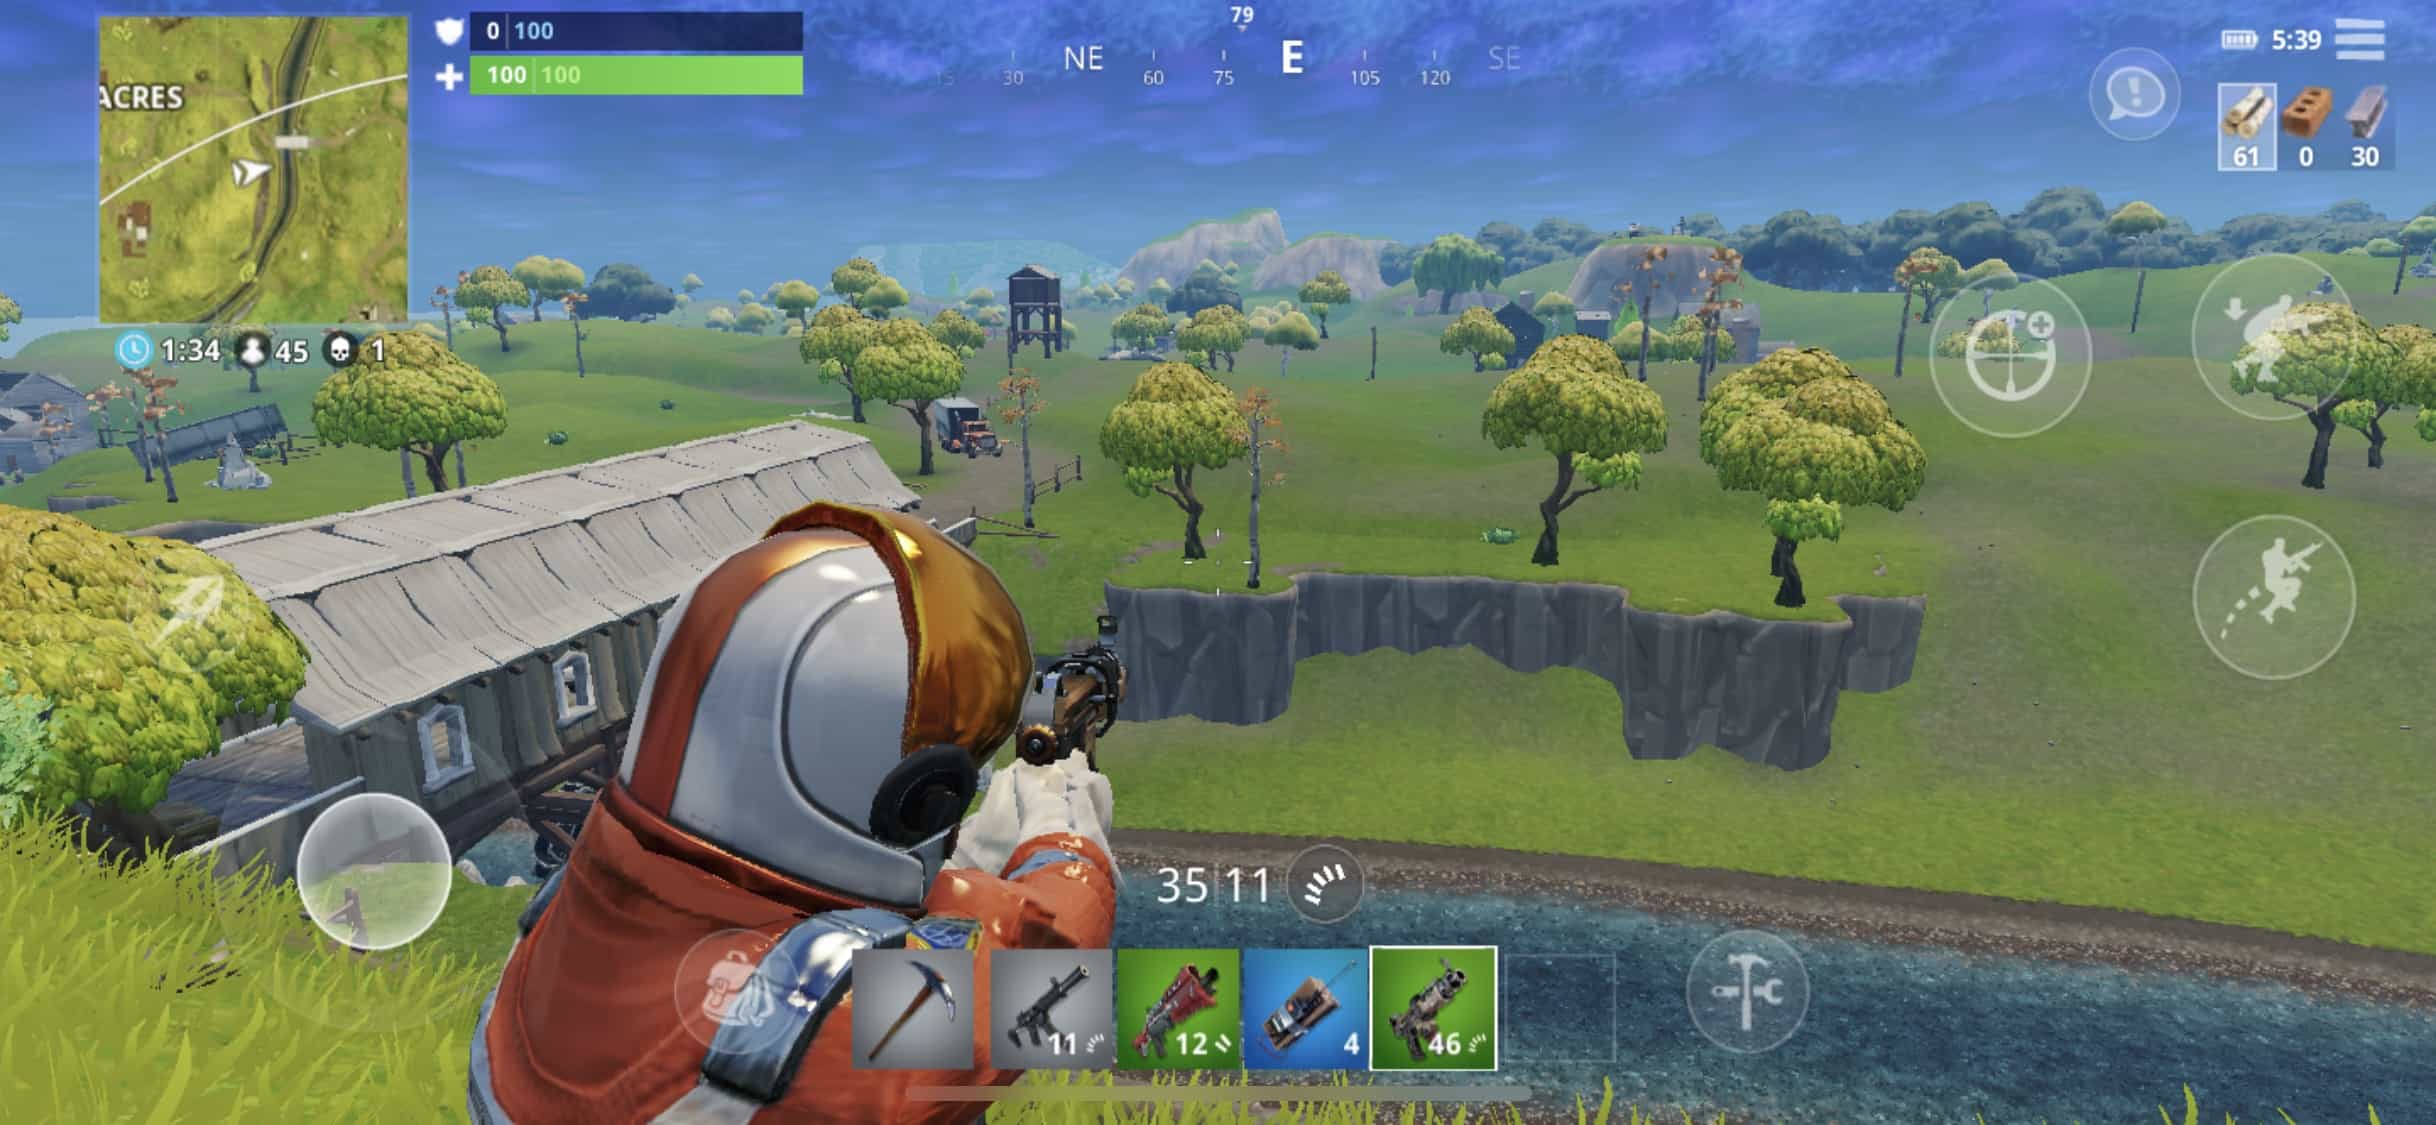 fortnite iphone - how to make fortnite run smoother on ps4